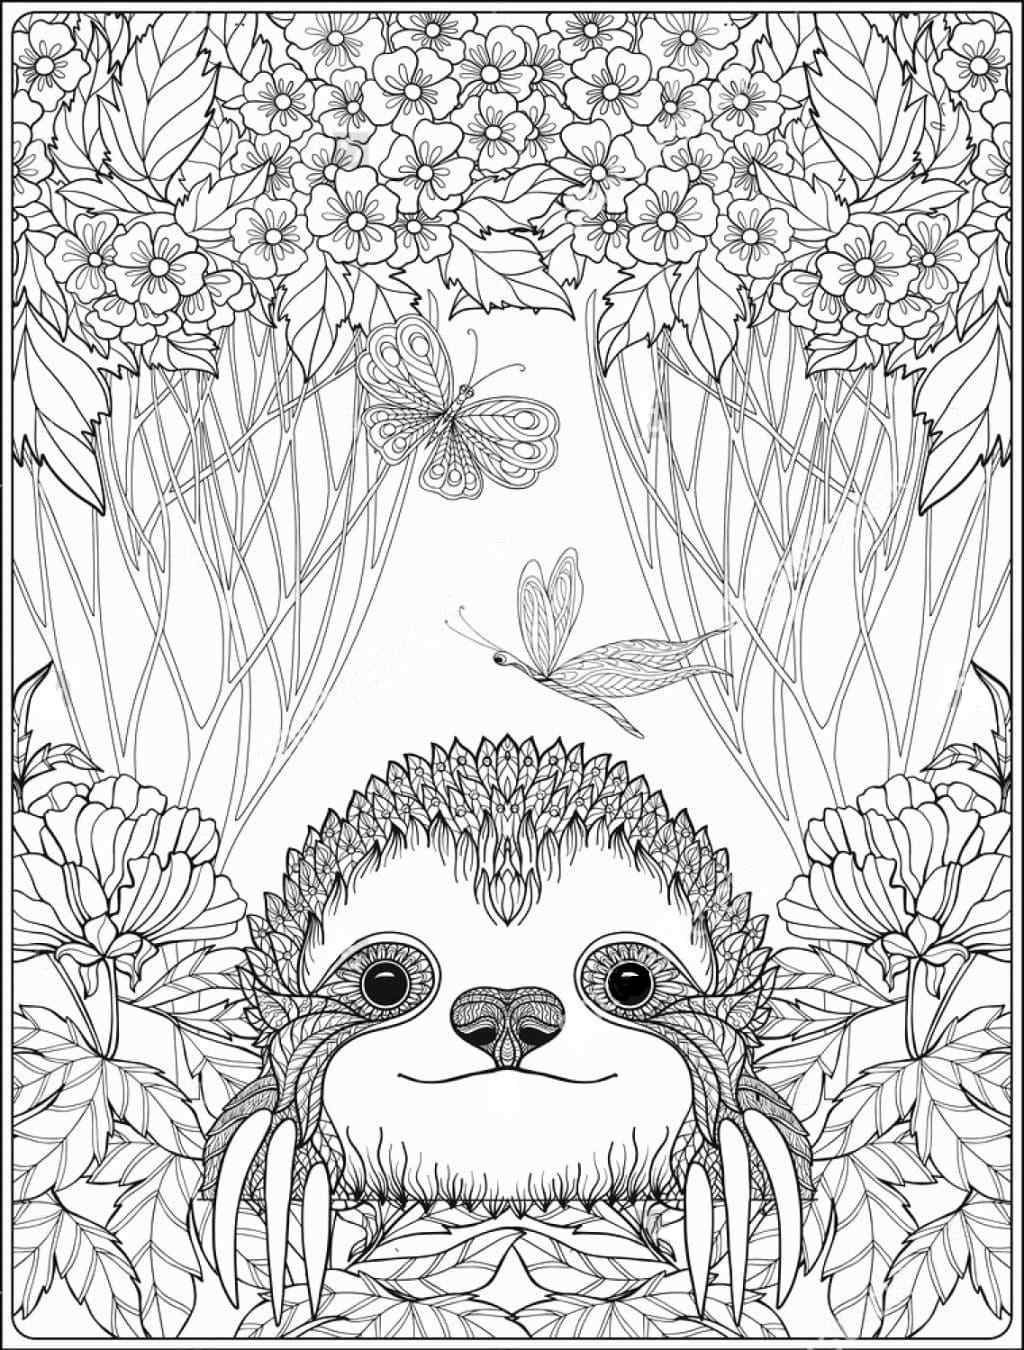 A Sloth Hid Among Butterflies And Flowers